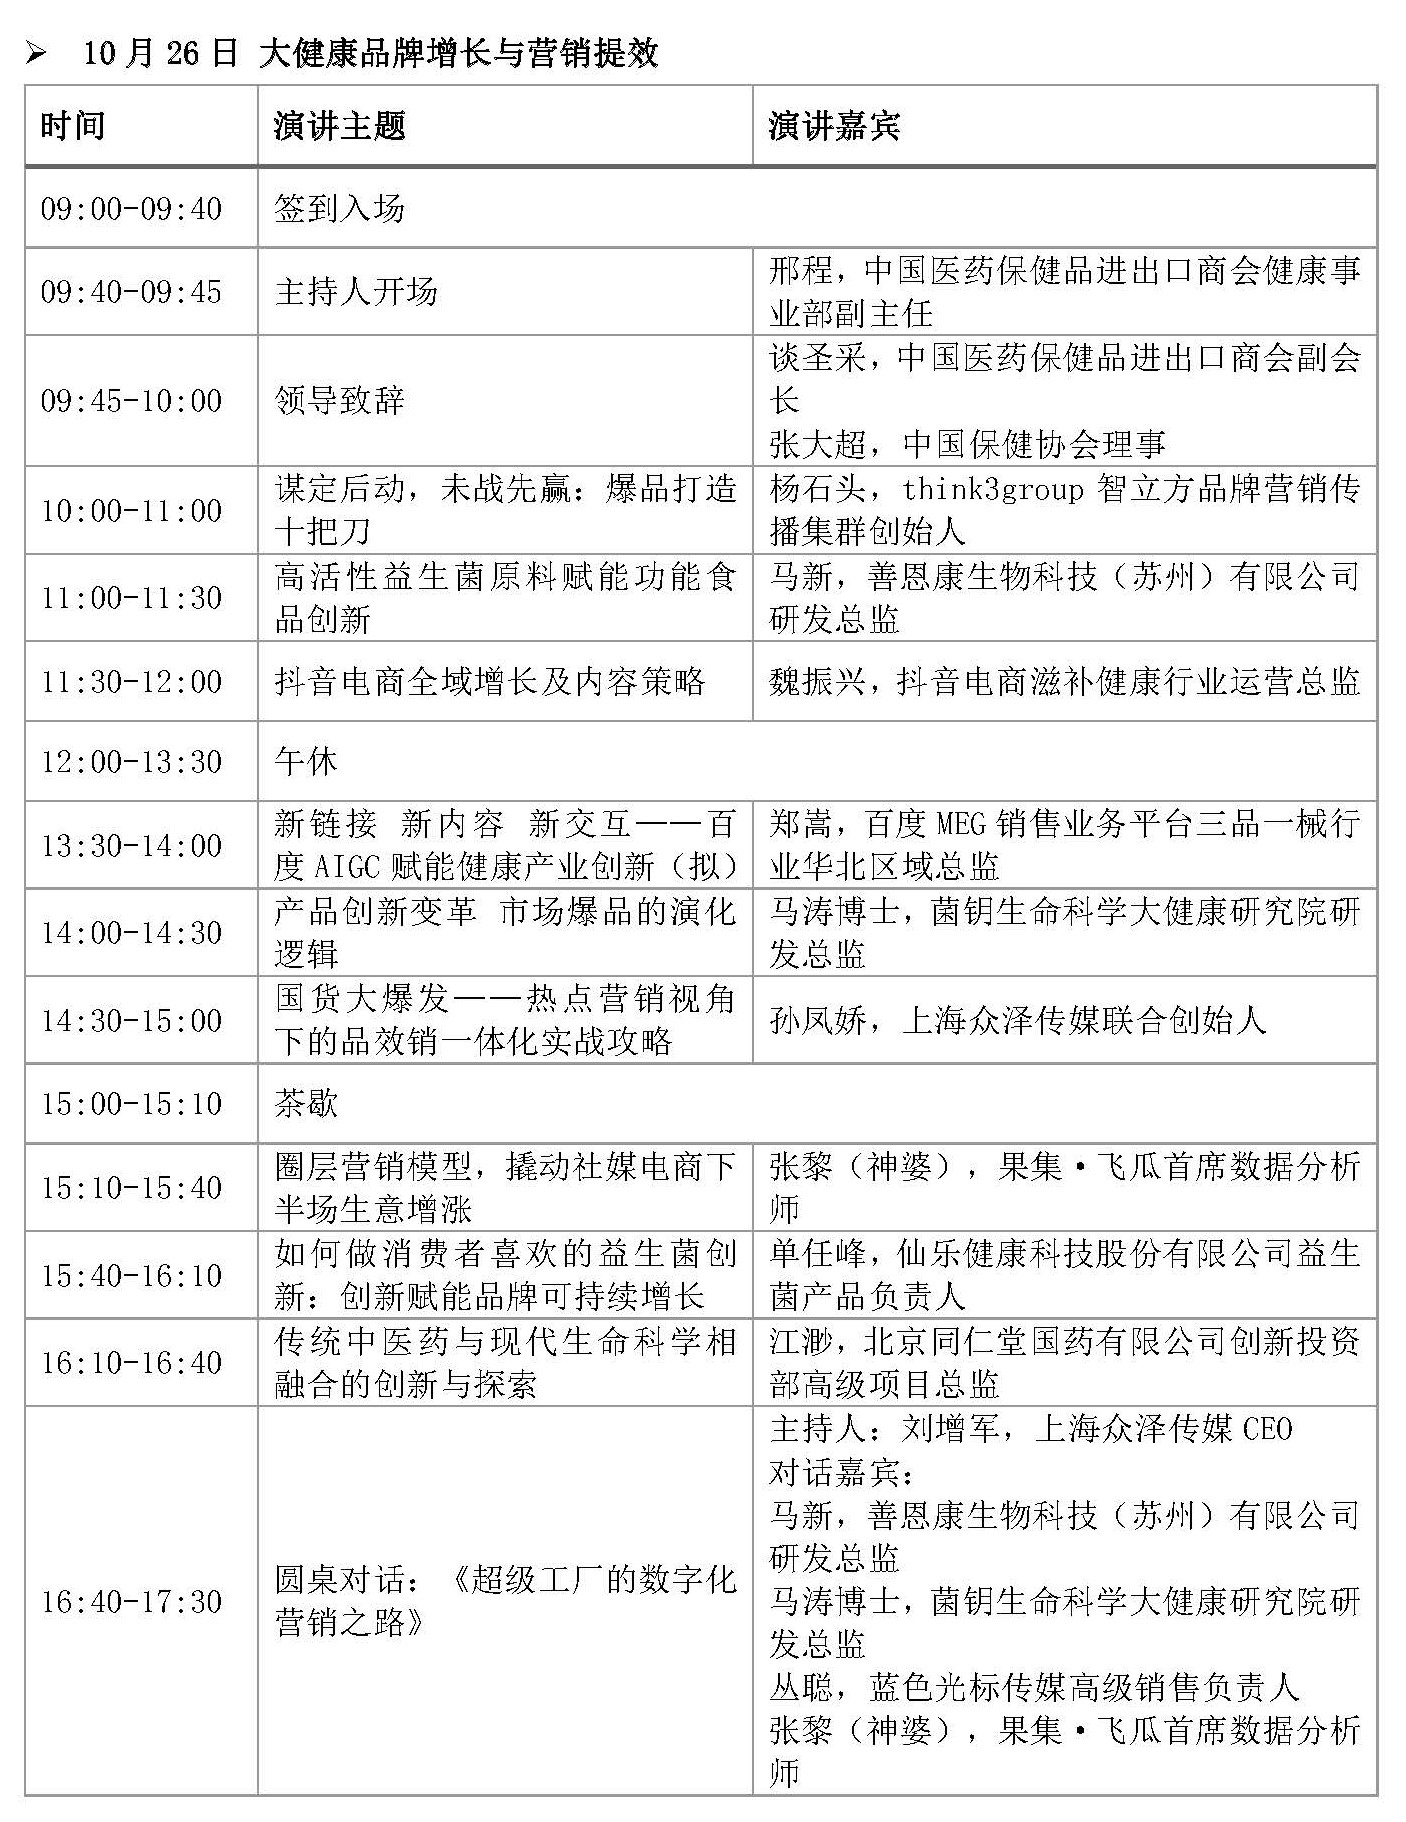 【 Beijing Xunchang Chamber of Commerce Super lineup 】 More than 20 industry experts gather here, and all the big health brand marketing masterpieces you want to hear are here! - www.globalomp.com